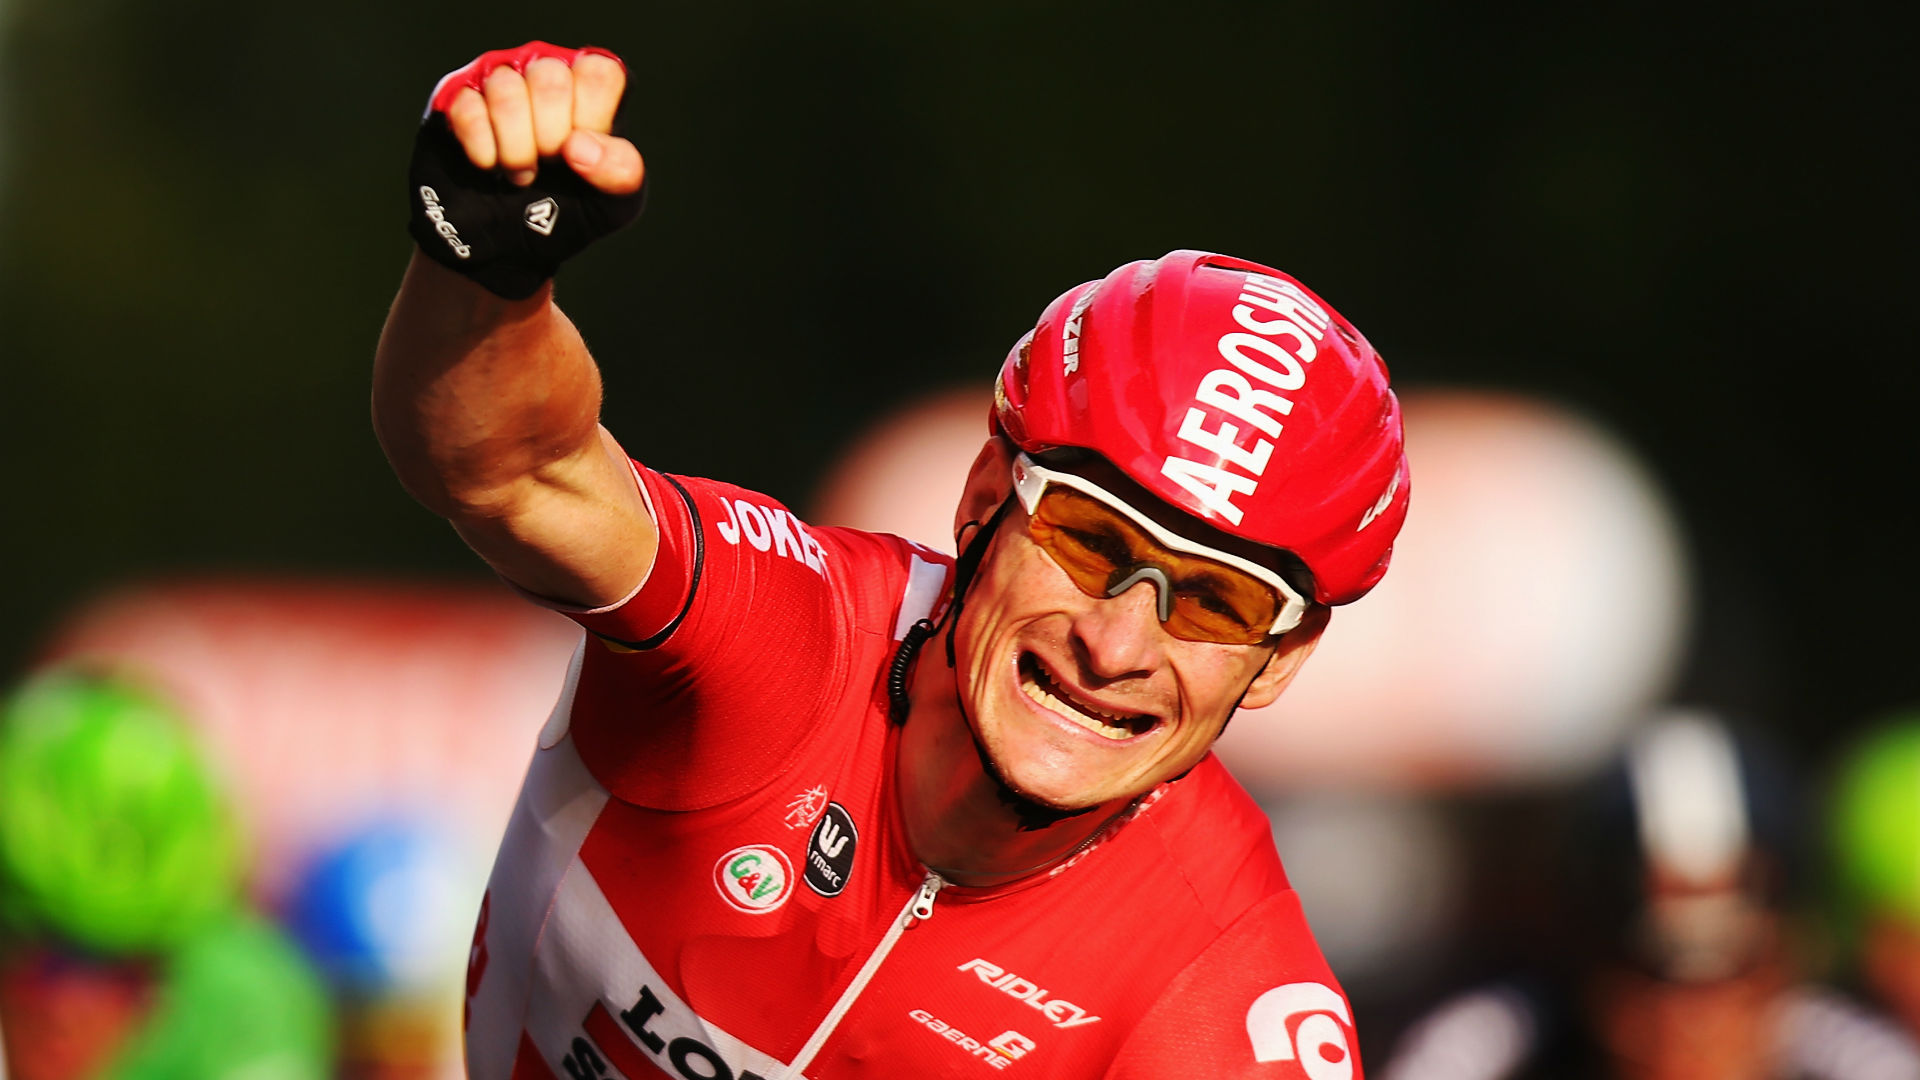 Arkea Samsic were handed a wildcard for the 2019 Tour de France, meaning Andre Greipel will get race the iconic Grand Tour again.